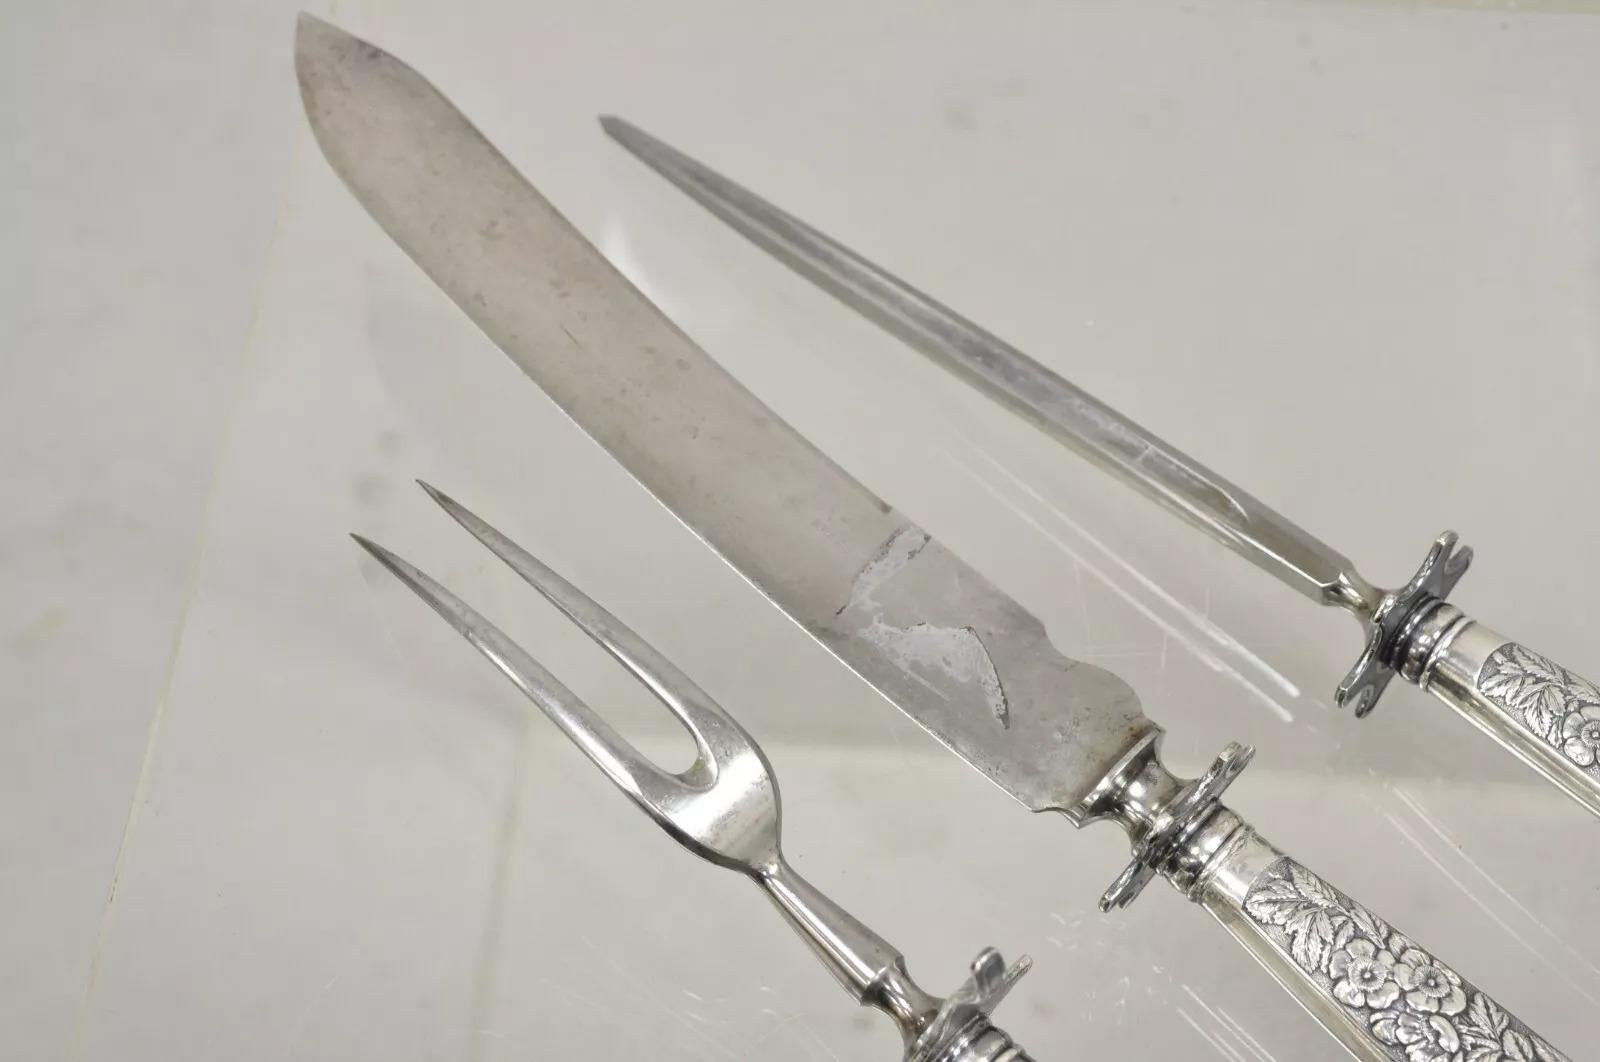 Antique R Wallace & Sons Victorian Silver Plated Repousse Meat Carving Set - 3Pc In Good Condition For Sale In Philadelphia, PA